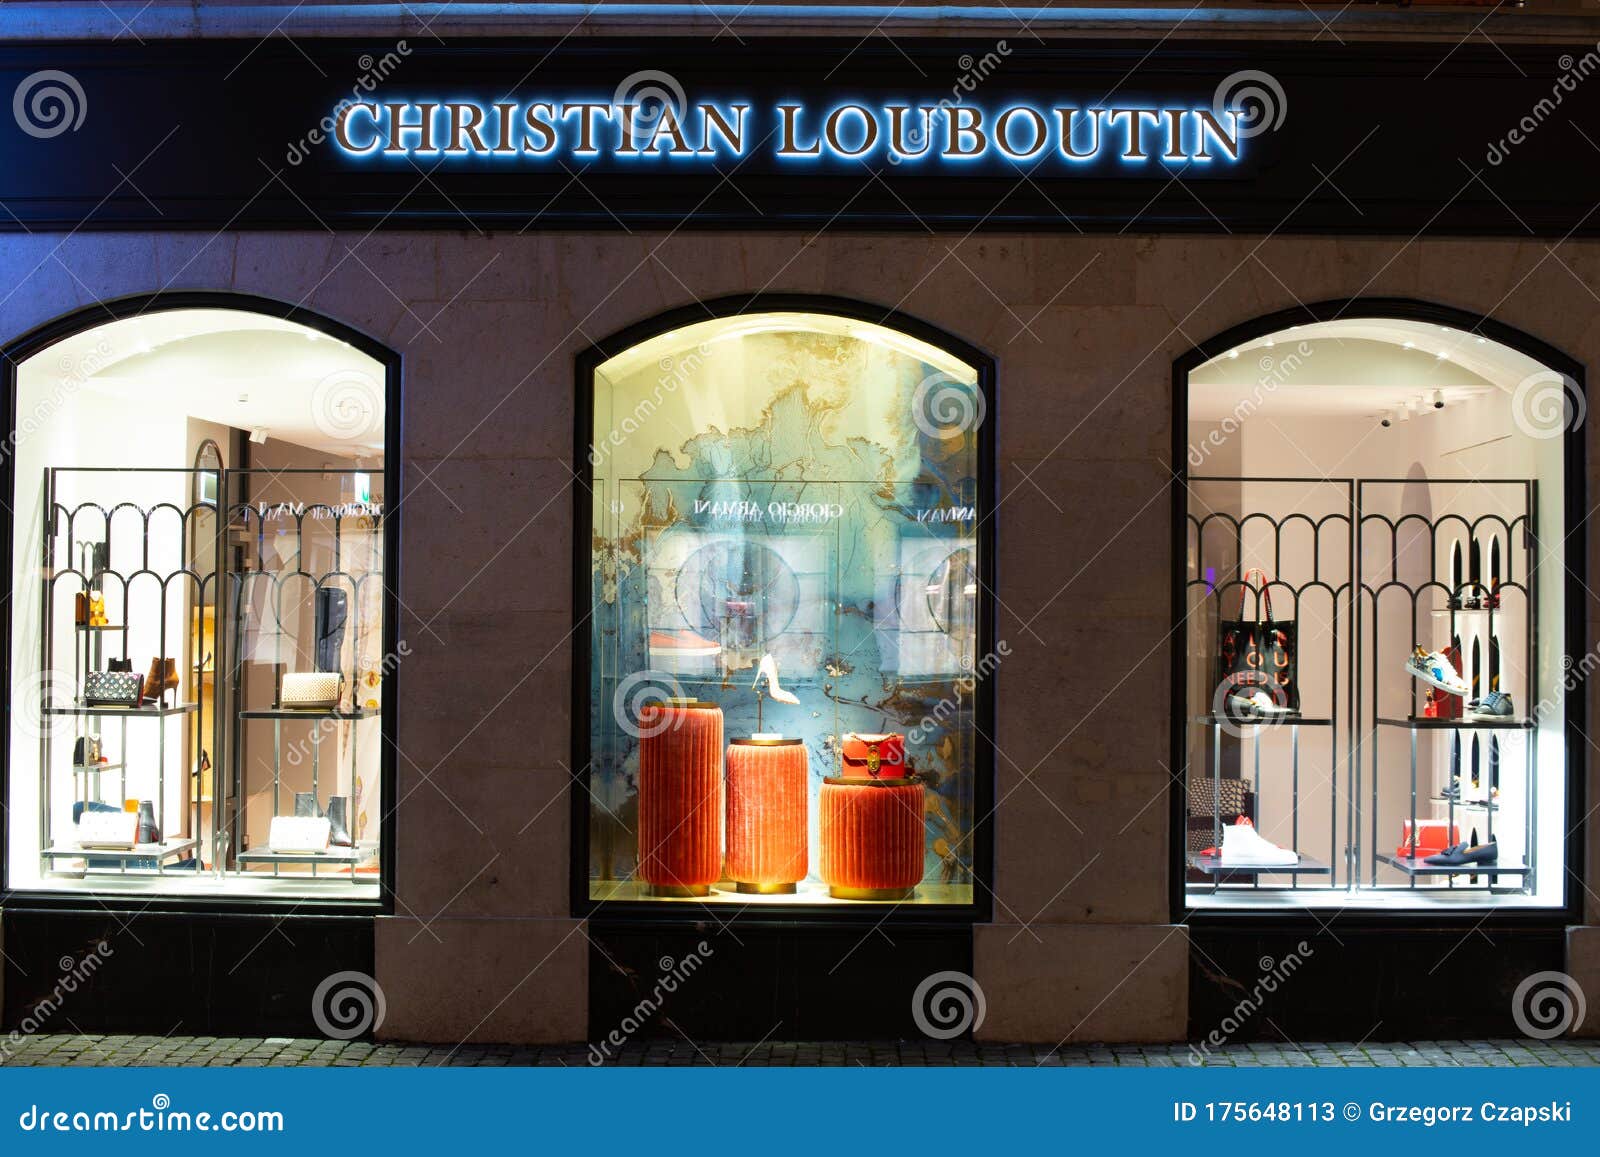 Christian Louboutin Window Store, Shoe Salon with High-end Stiletto  Footwear, Handbags on Display for Sale, Exposition Editorial Stock Photo -  Image of laboutin, city: 175648113